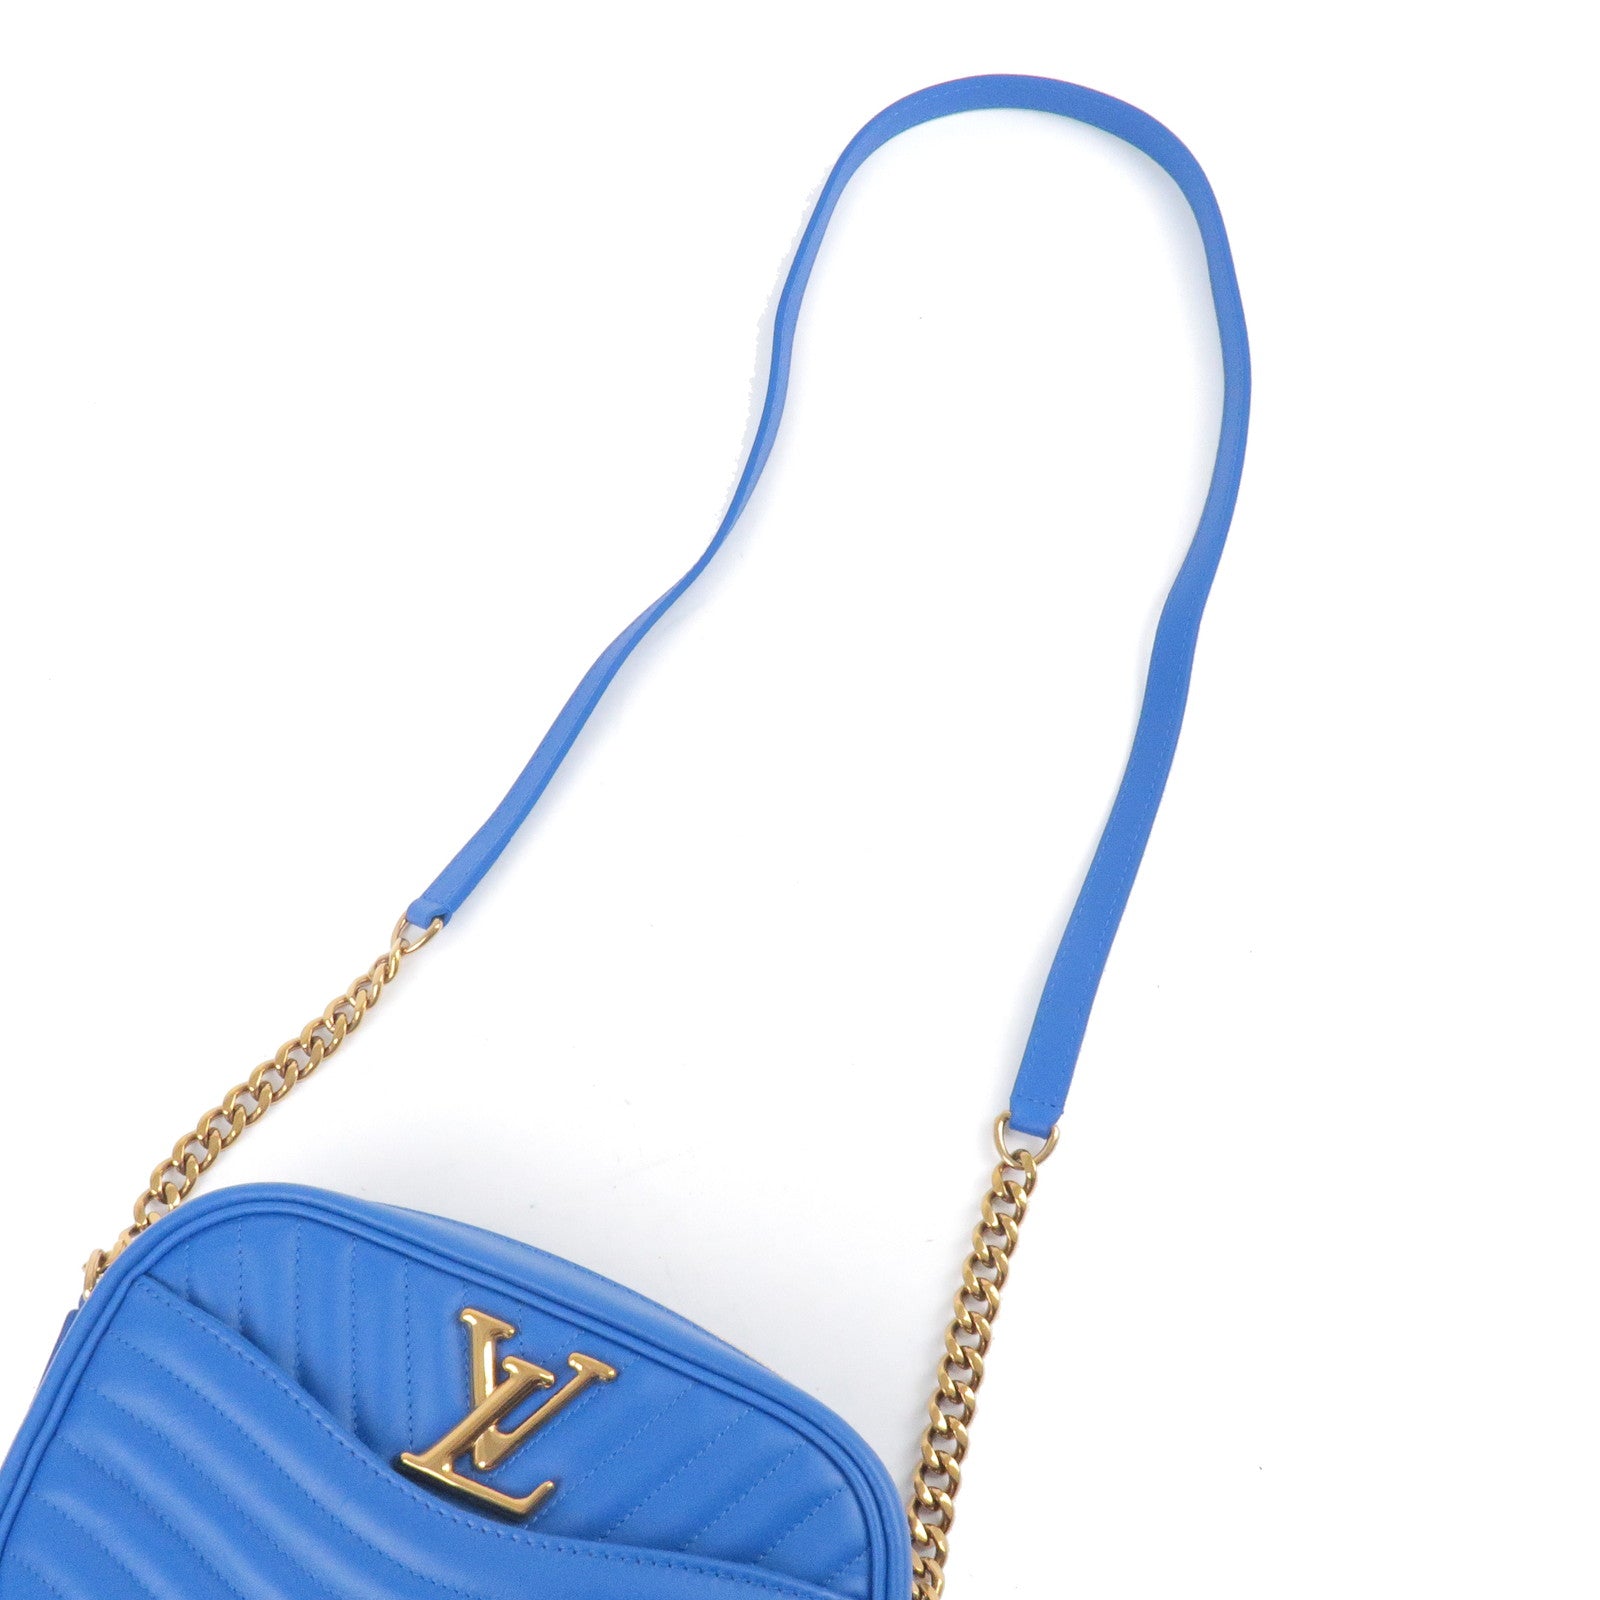 LOUIS VUITTON New Wave Quilted Leather Camera Shoulder Bag Light Blue